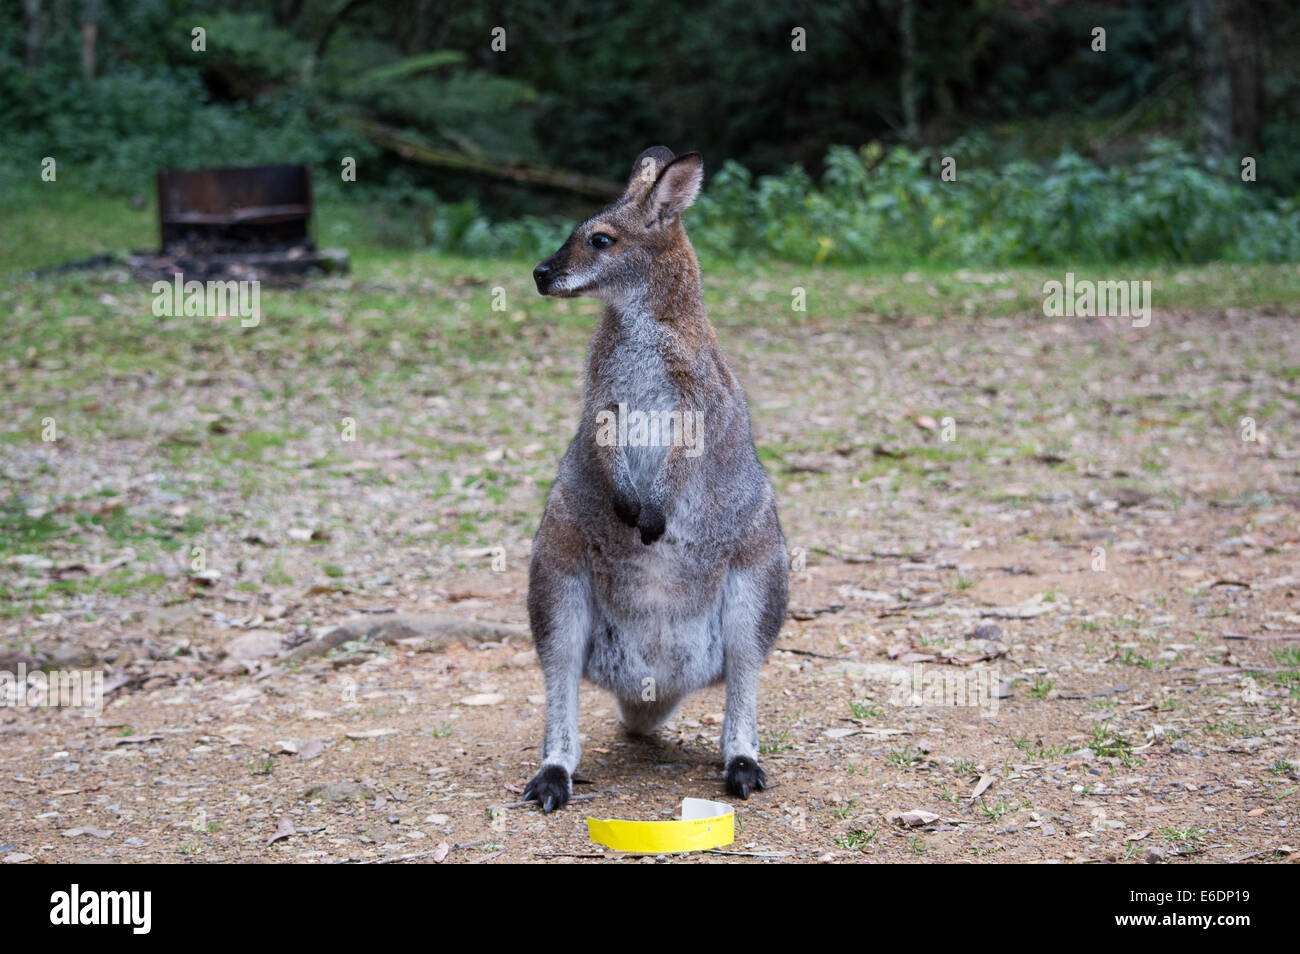 Wild wallaby posing for the camera. Stock Photo